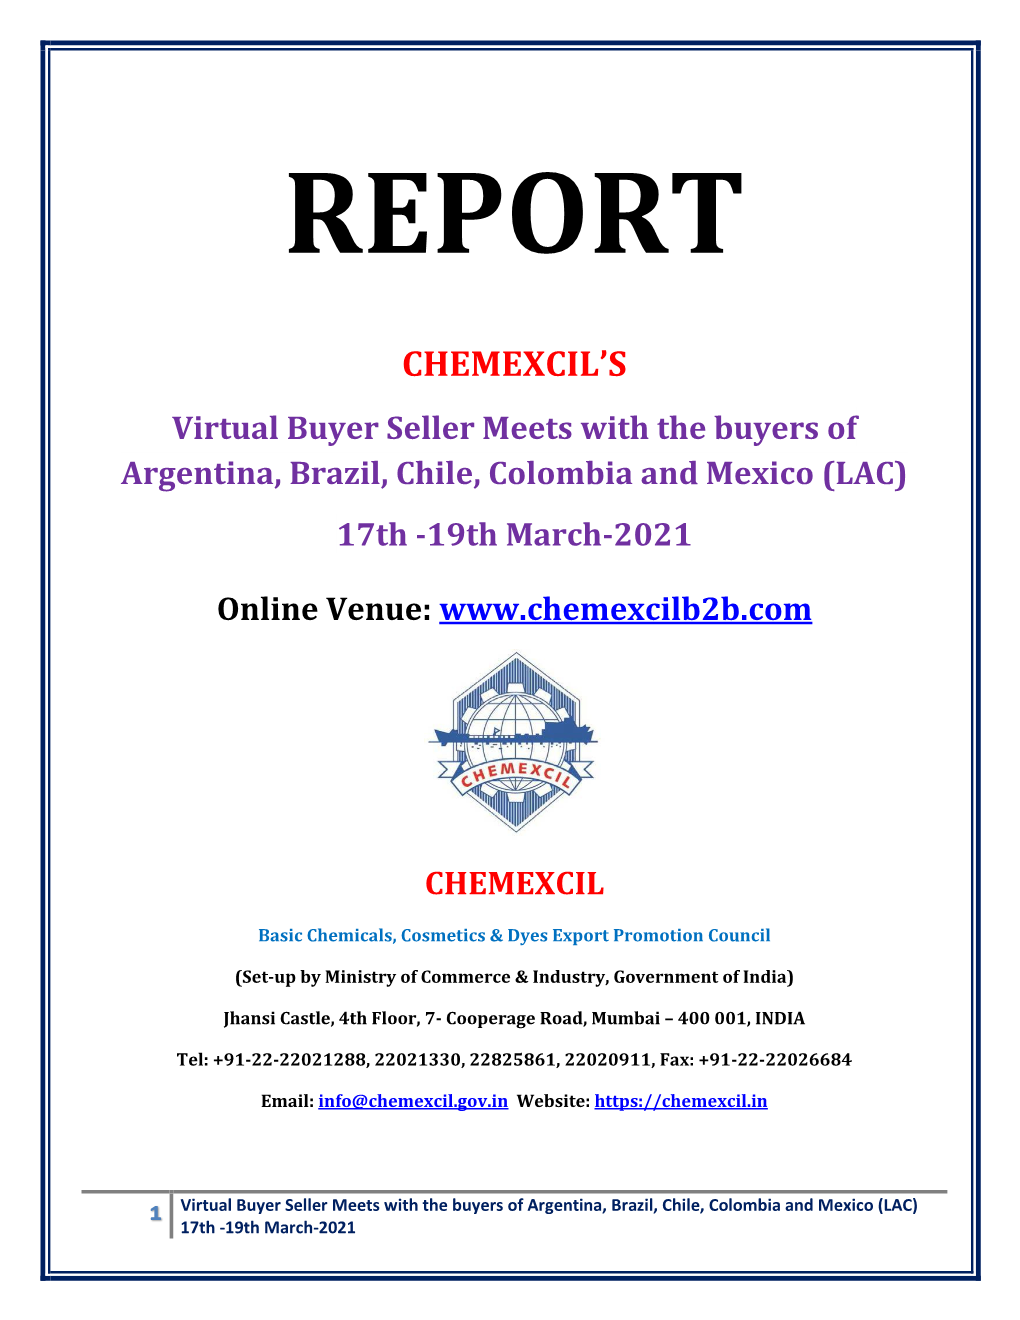 BRIEF REPORT CHEMEXCIL's Virtual Buyer Seller Meets with the Buyers